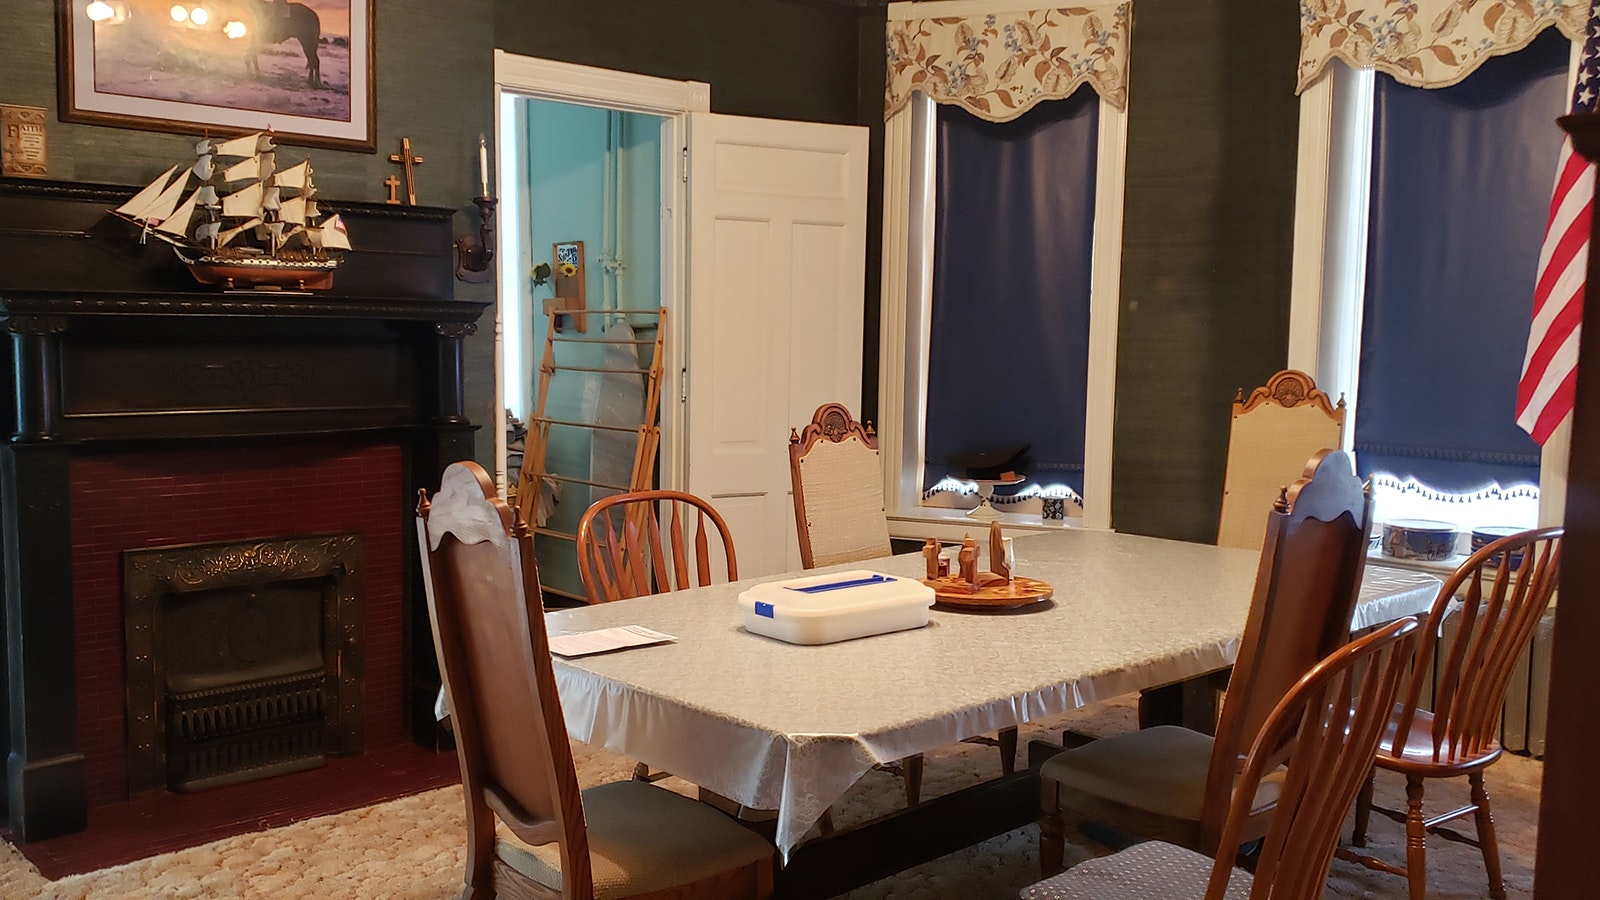 The dining room is much as it was when the house was completed in 1901, including the rice paper wallpaper.